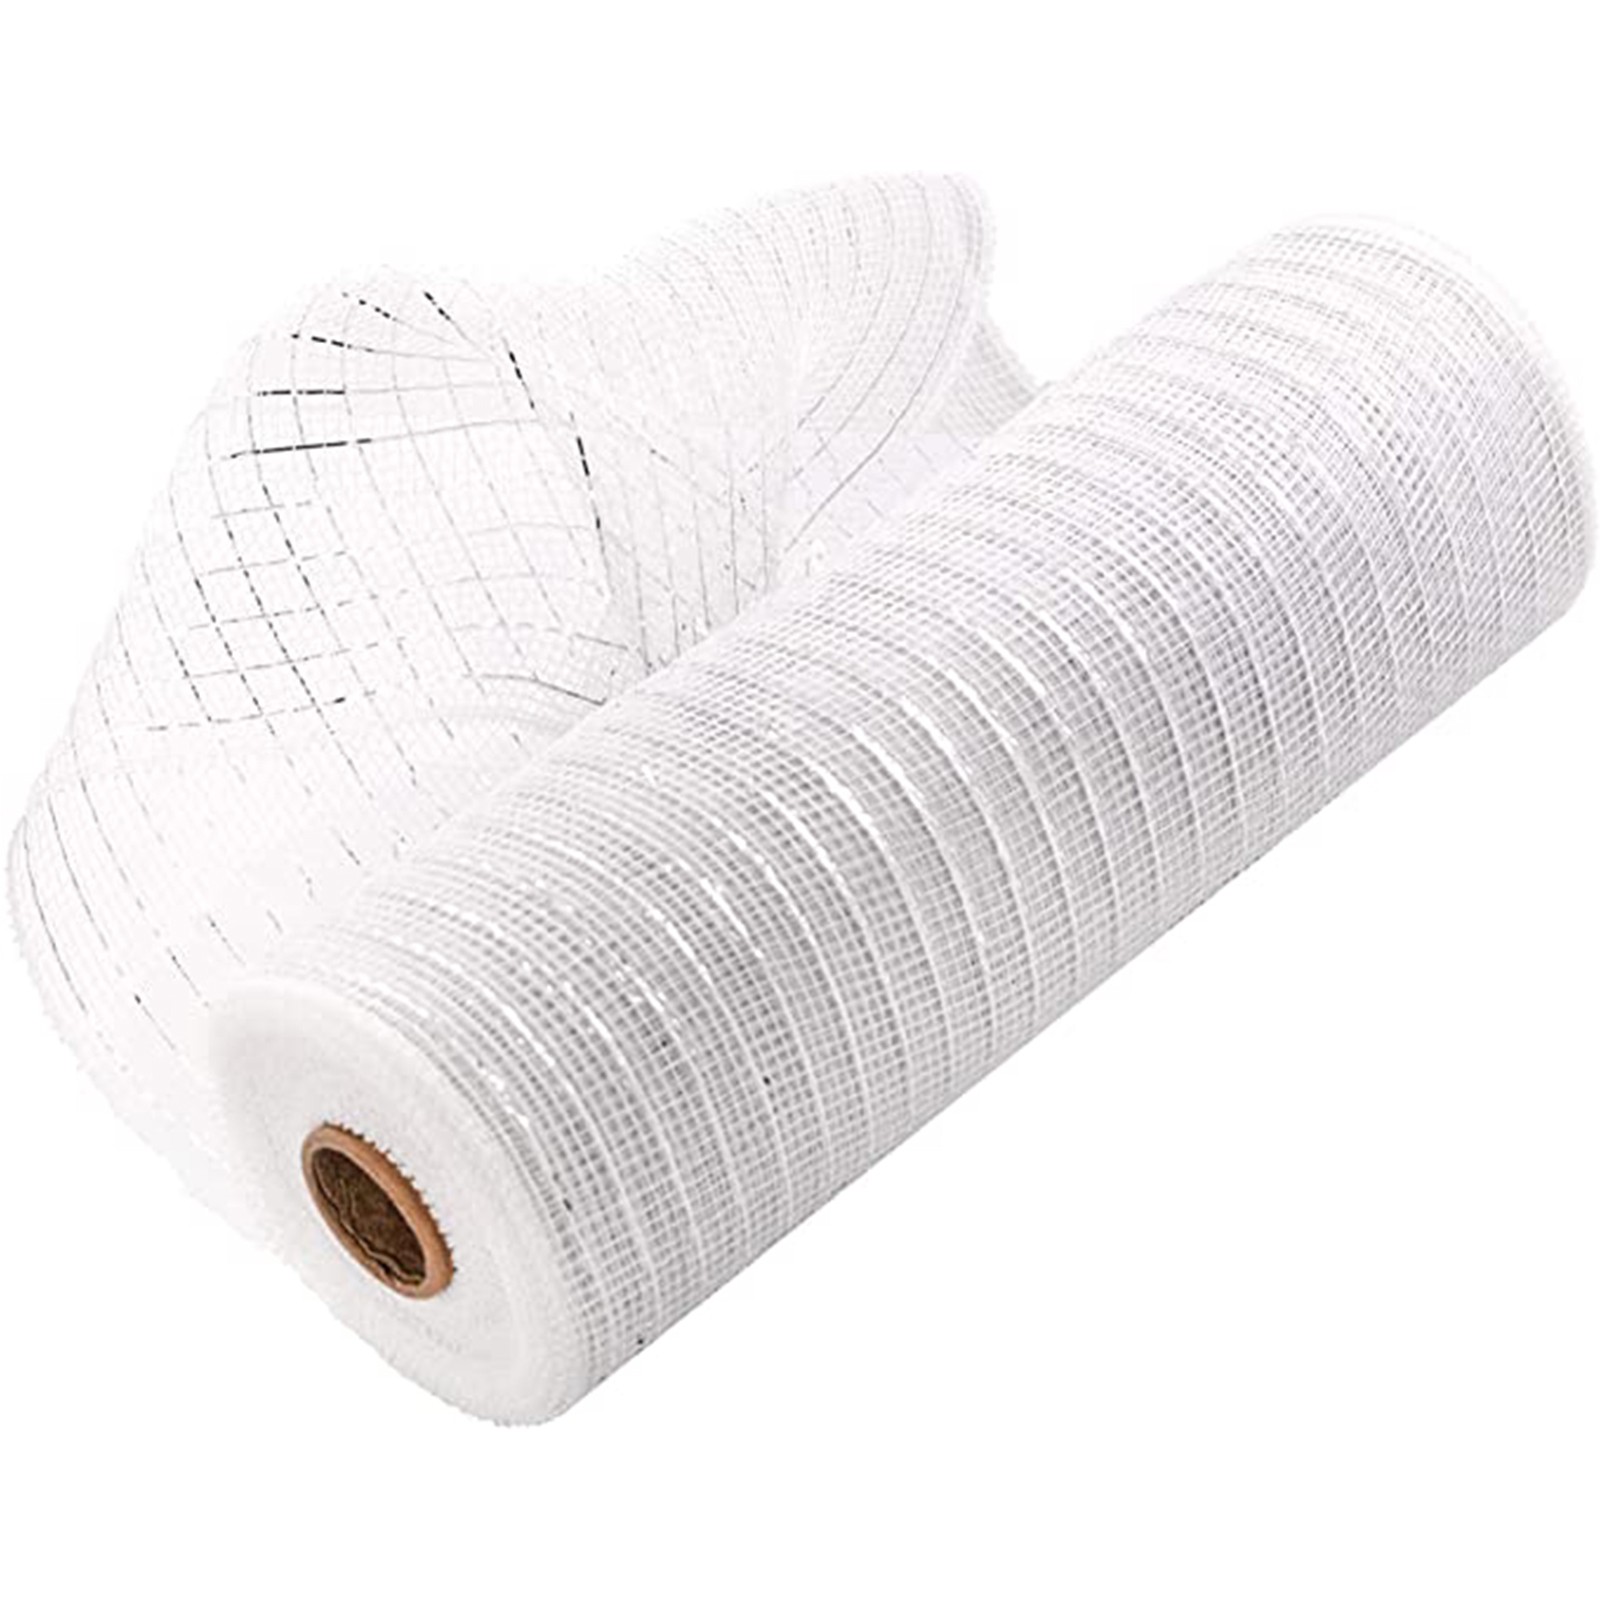 Jeashchat White Mesh Ribbon with Foil 10 inch x 30 Feet Each Roll for Wreaths, Presents, Swags Bows Wrapping and Decorating Clearance, Size: One Size